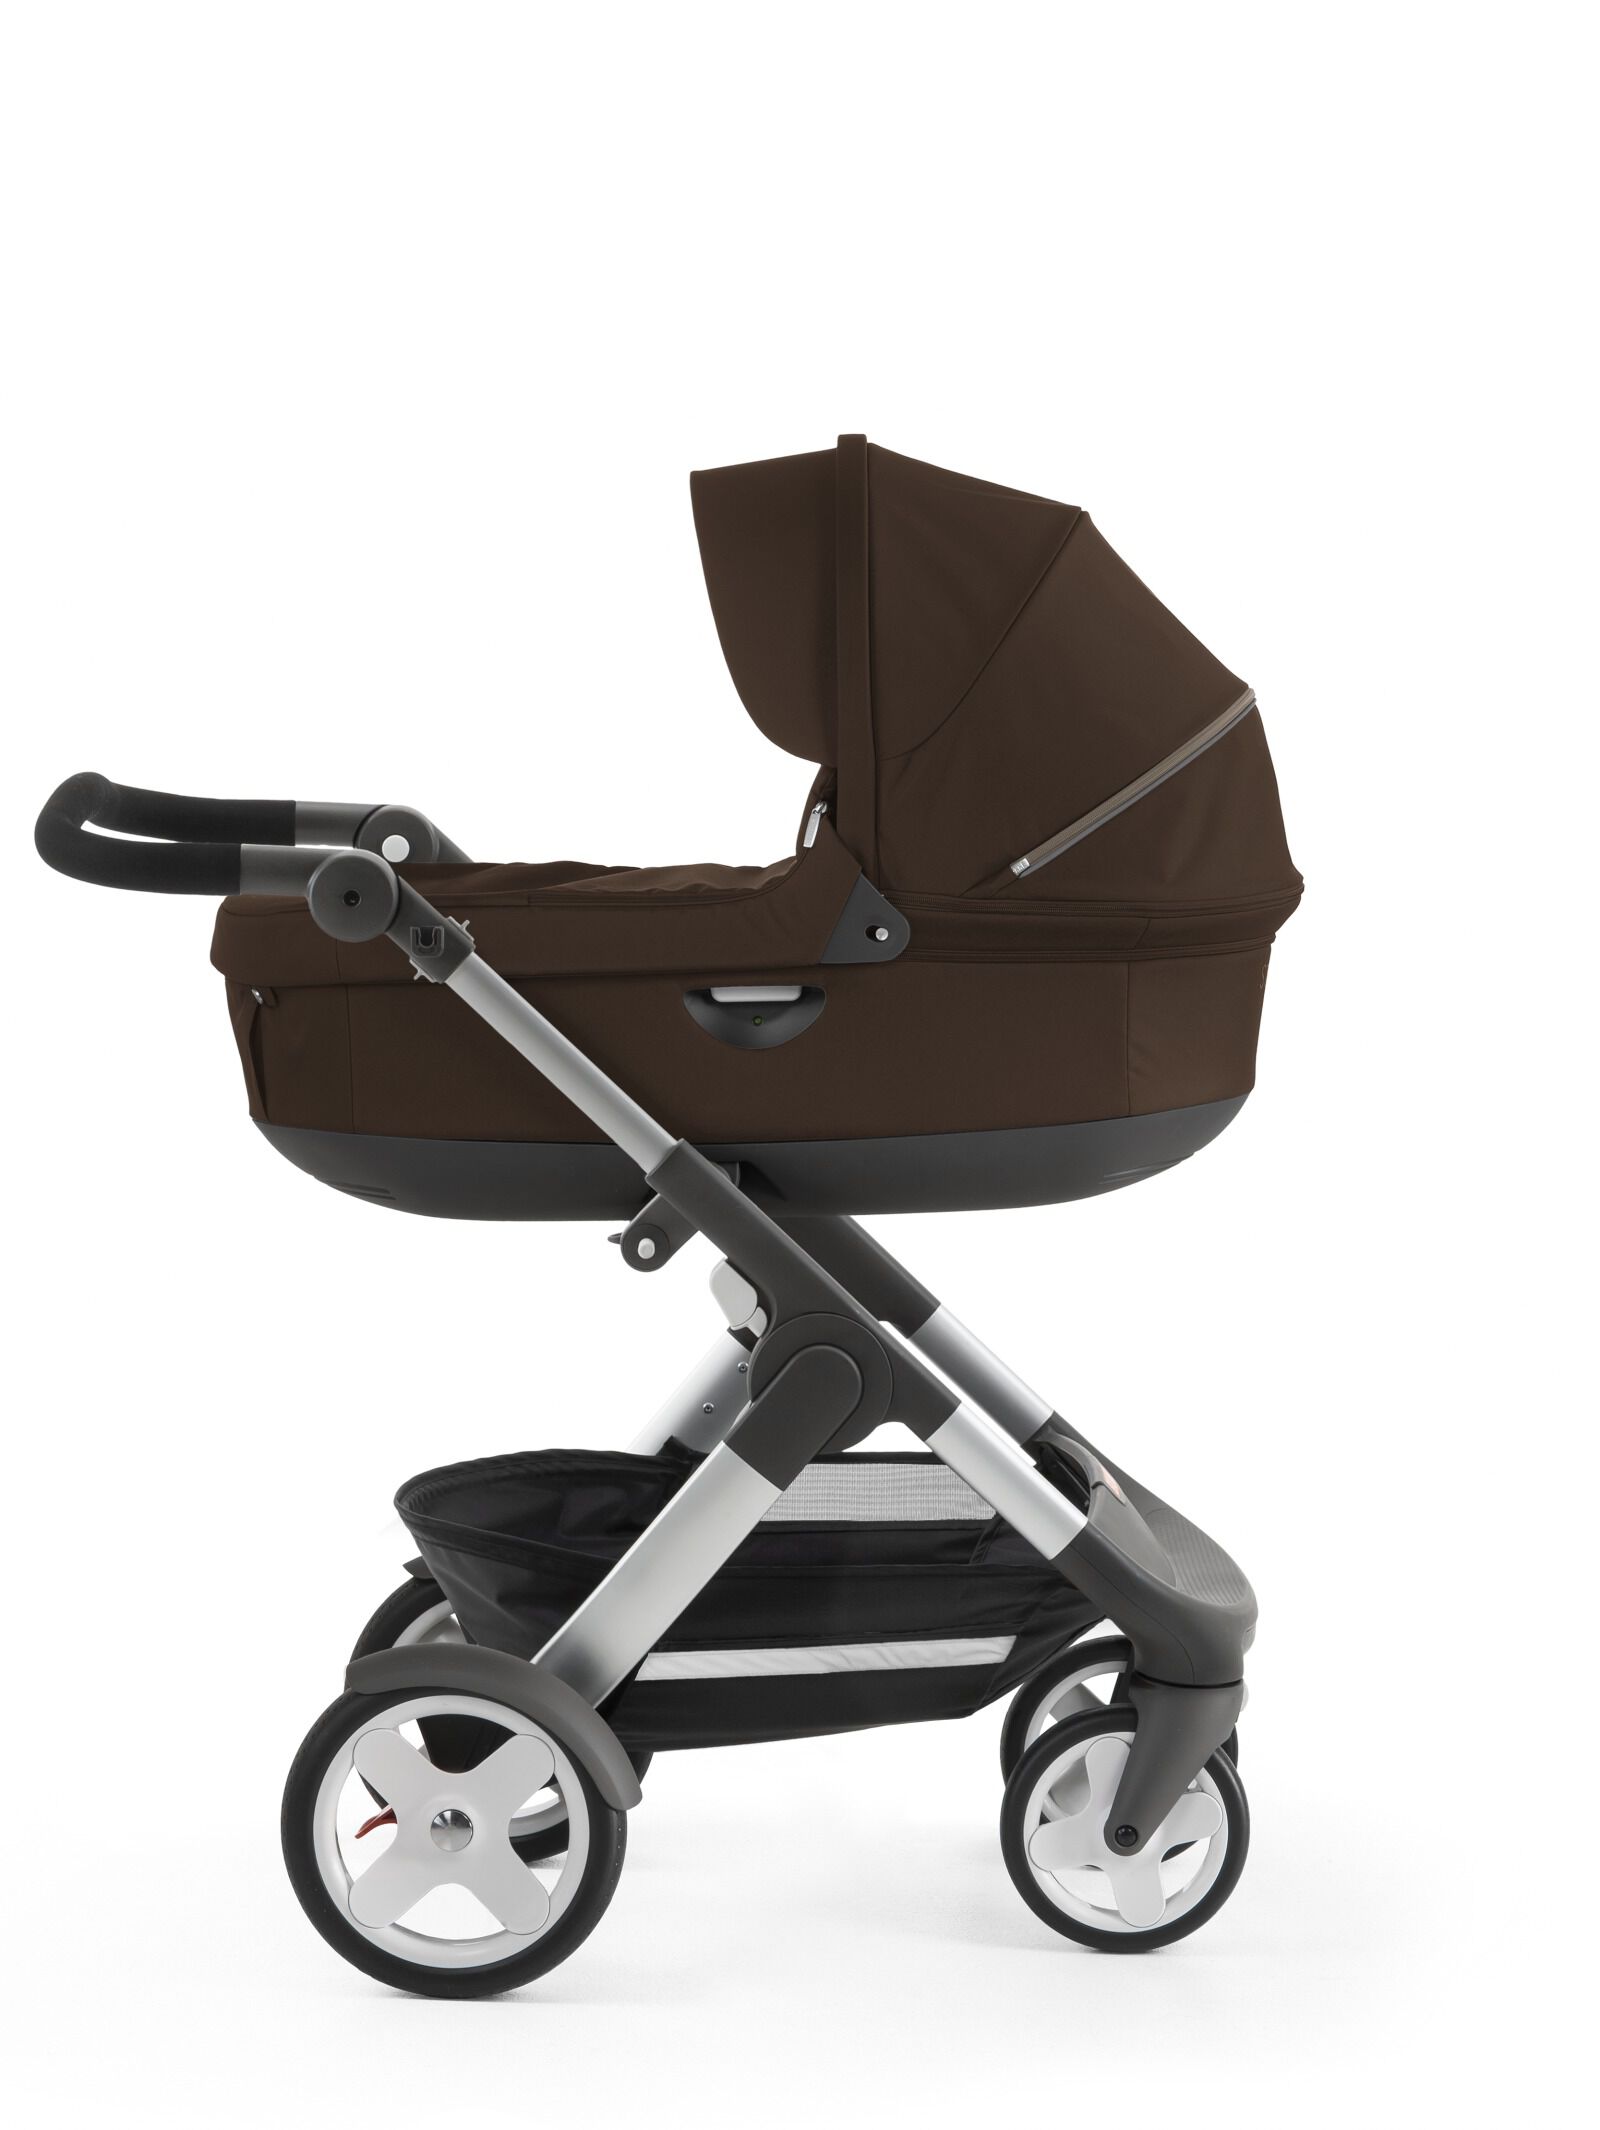 baby carry cot with wheels